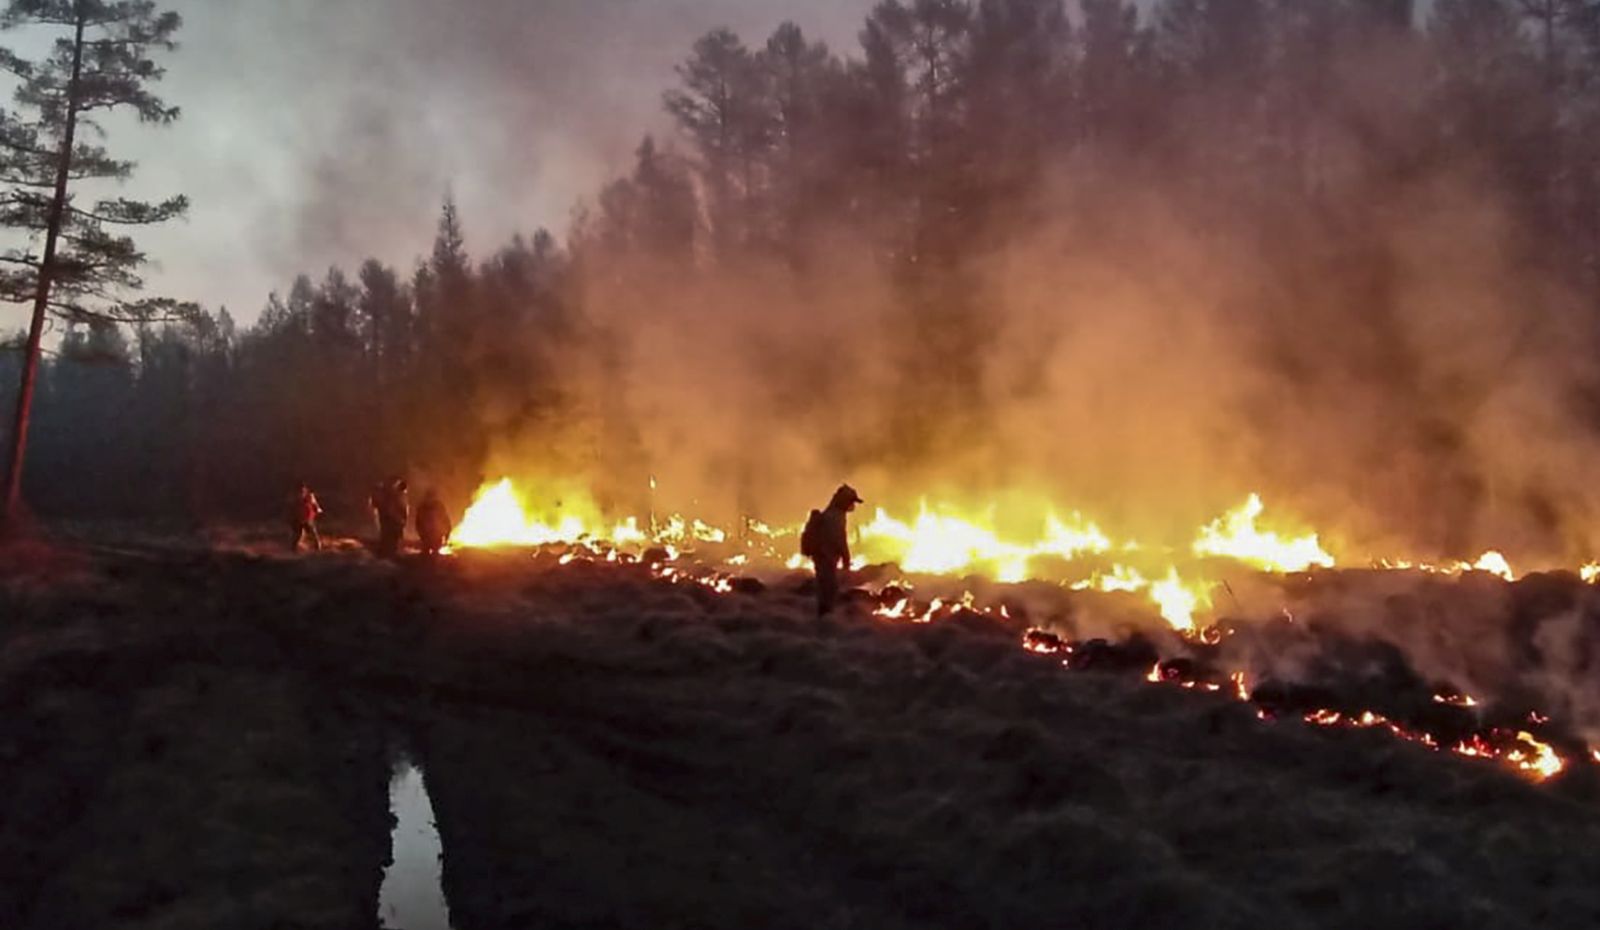 epa09359691 A handout photo made available by the Ministry for Nature Protection of the Sakha Republic (Yakutia) on 23 July 2021, shows fire fighters try to extinguish wildfire in the Republic of Sakha (Yakutia), Russia.  According to the operational data of Russian Emergency ministry, 216 wildfires are active on the territory of the Republic of Sakha (Yakutia). 2,119 people and 297 pieces of equipment were involved in extinguishing forest fires in Yakutia.  EPA/MINISTRY OF NATURE PROTECTION OF YAKUTIA HANDOUT HANDOUT HANDOUT EDITORIAL USE ONLY/NO SALES HANDOUT EDITORIAL USE ONLY/NO SALES